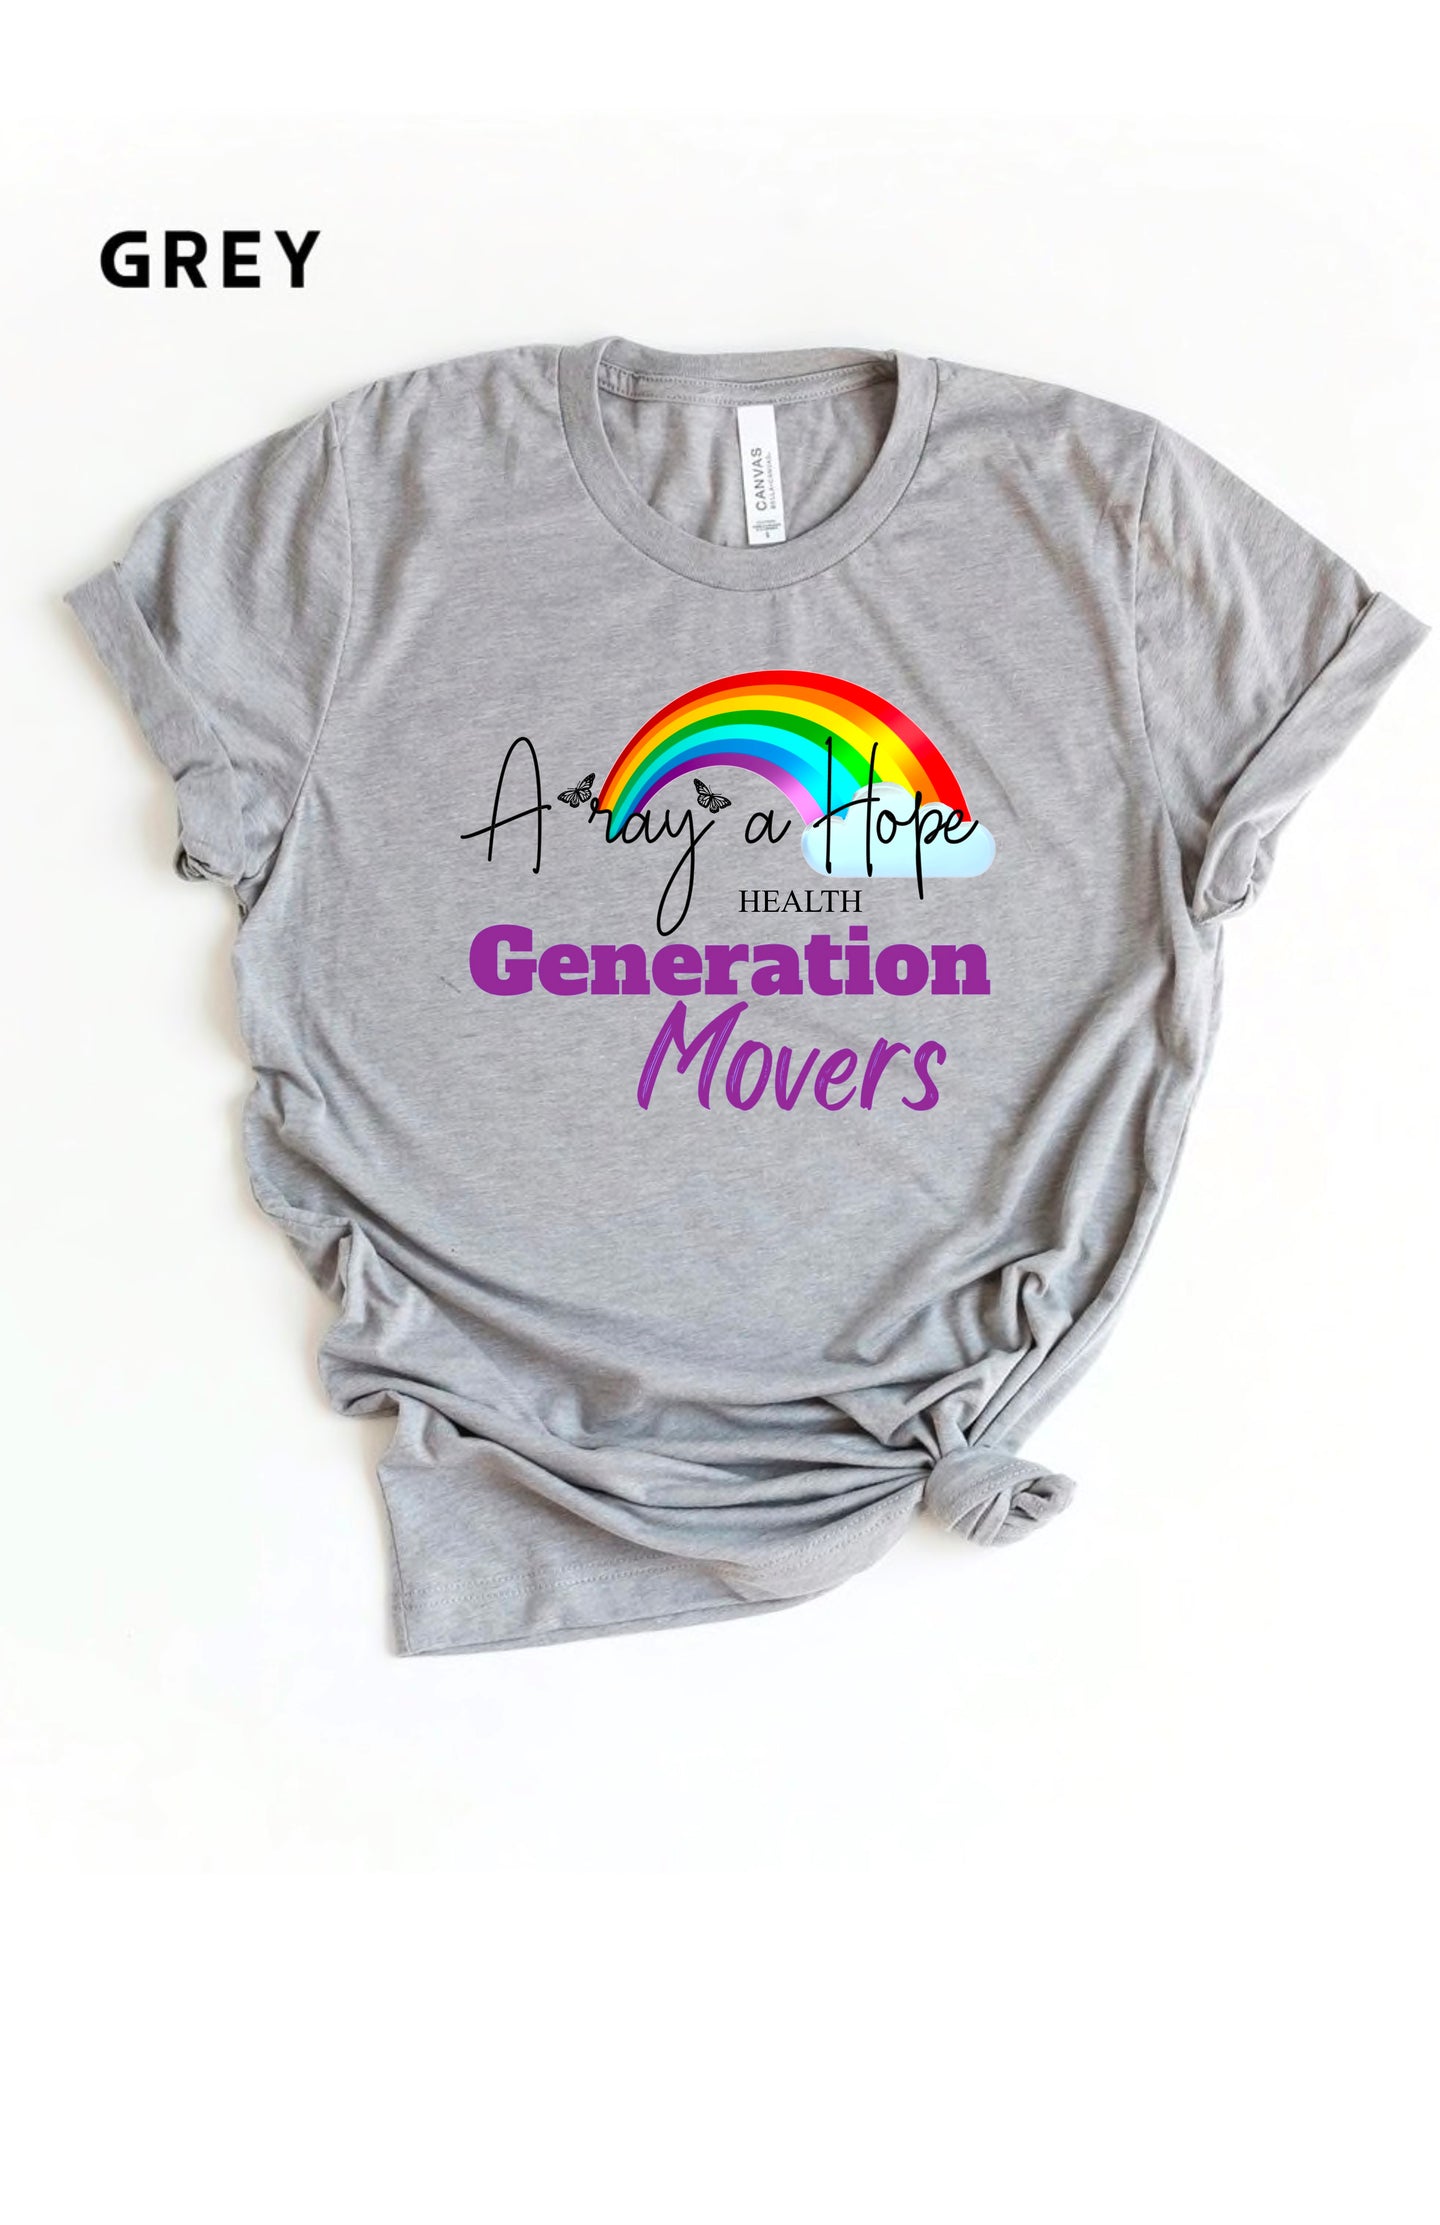 A Ray a Hope - Generation Movers - Screen Print